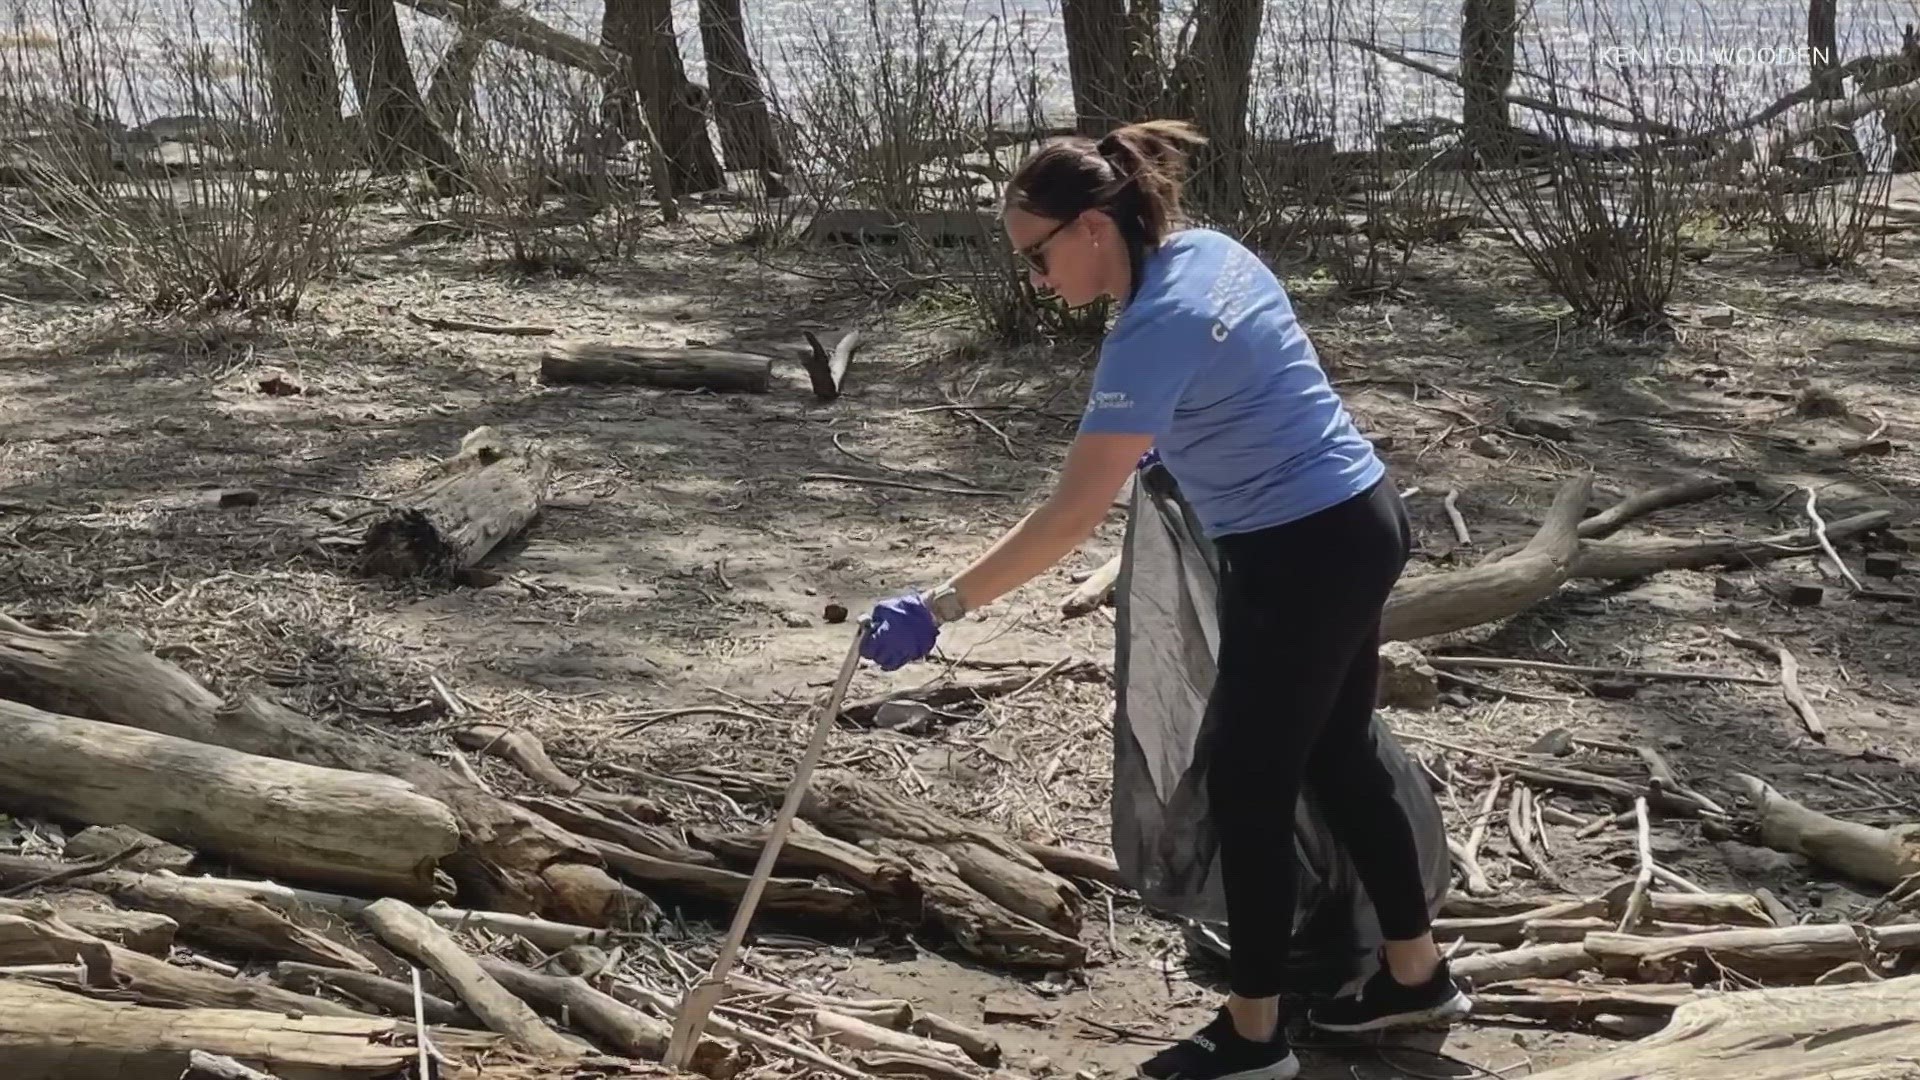 Volunteers helped clean up trash and debris from the falls during Earth Day celebrations.